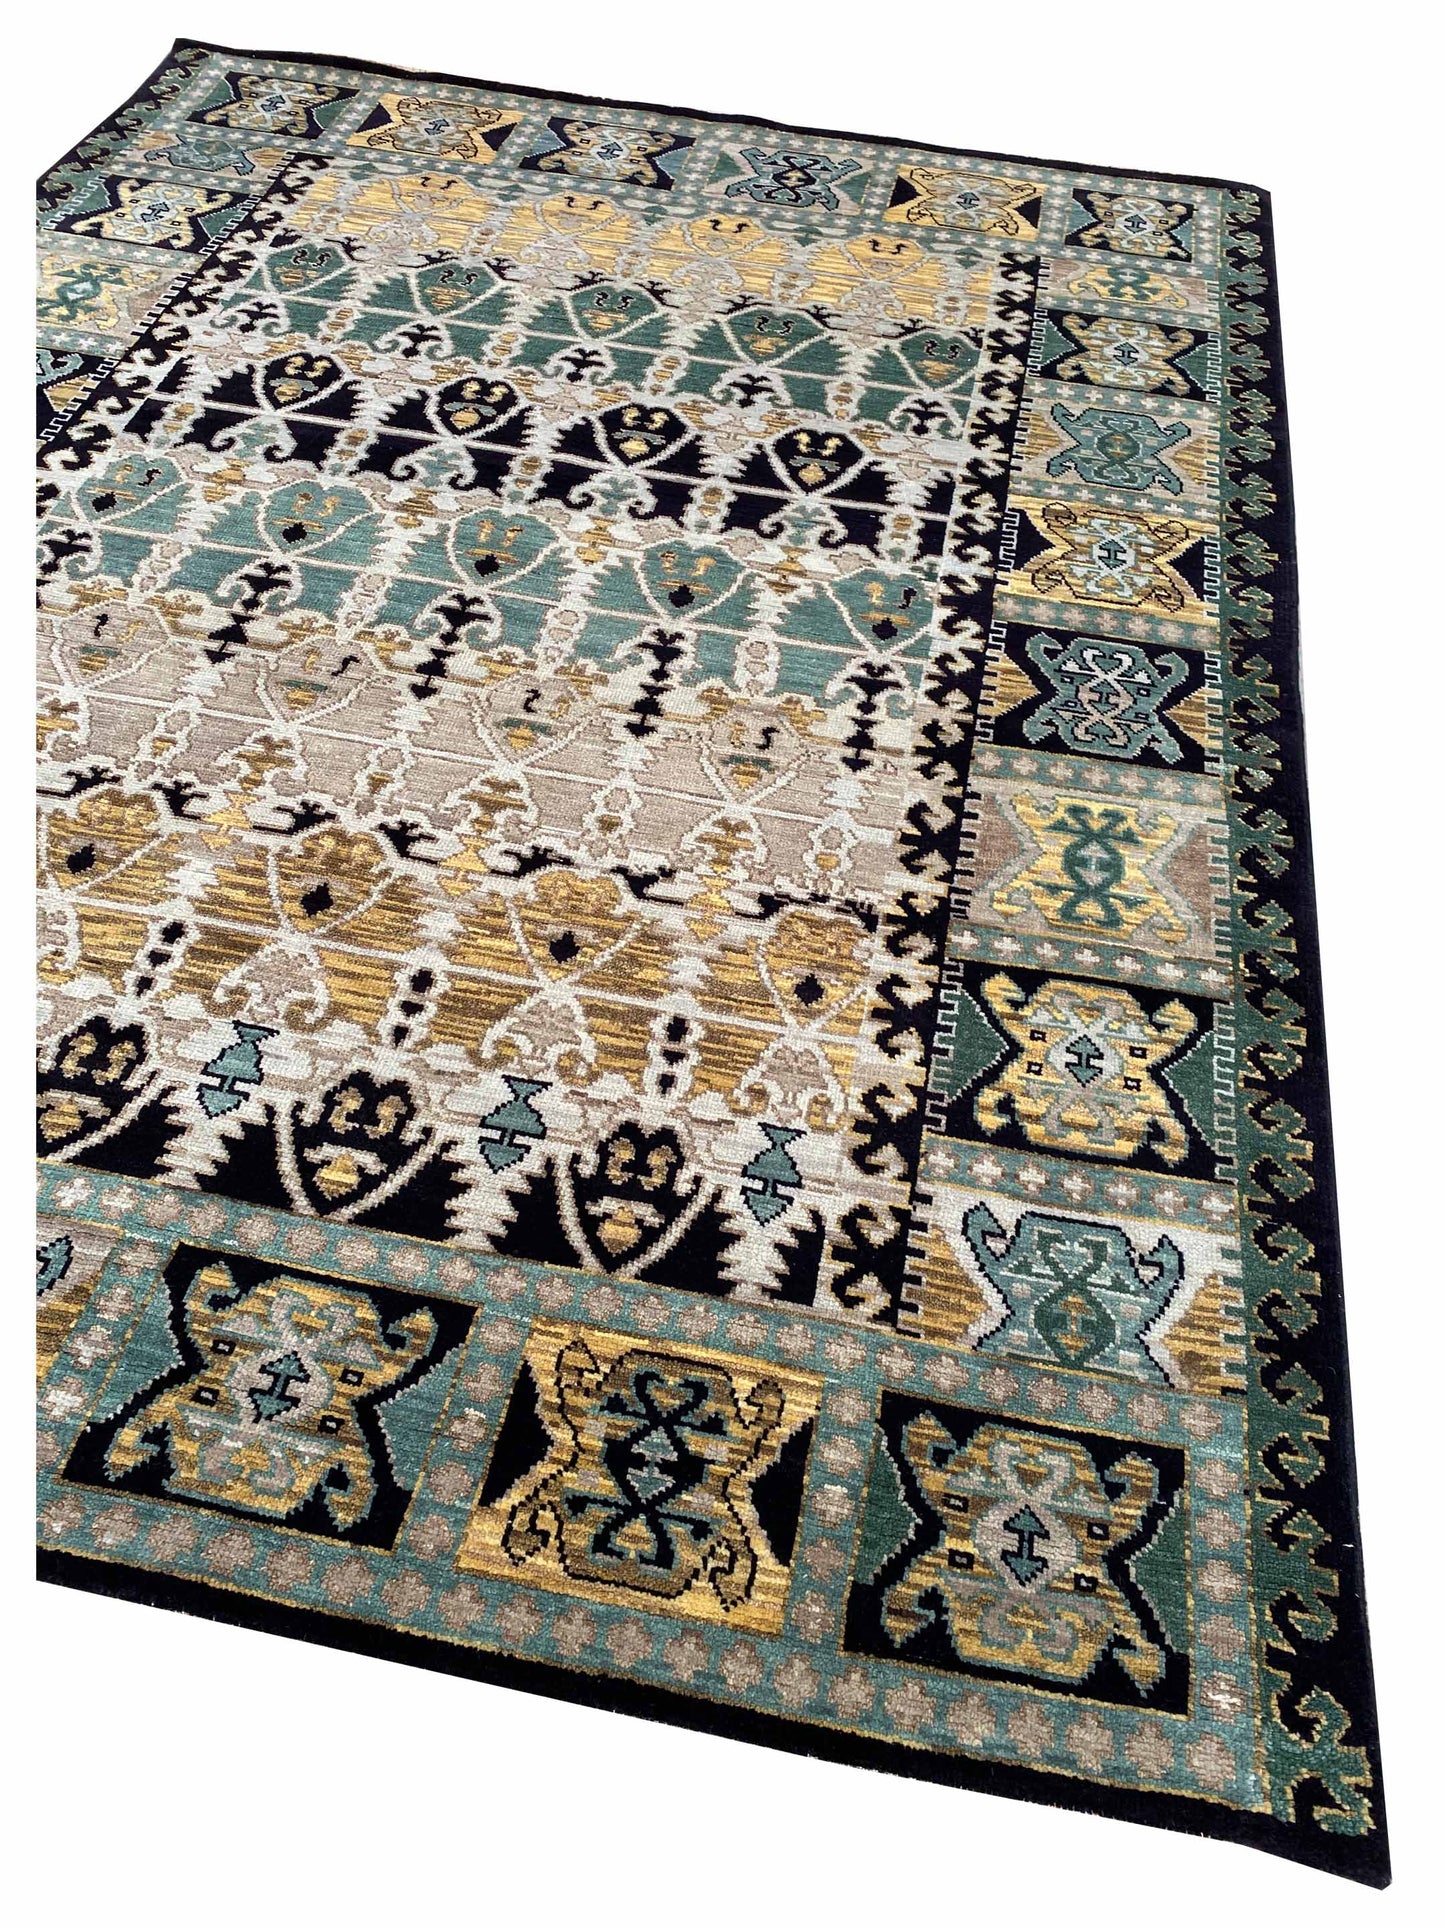 Artisan Blossom-2  Black  Traditional Knotted Rug